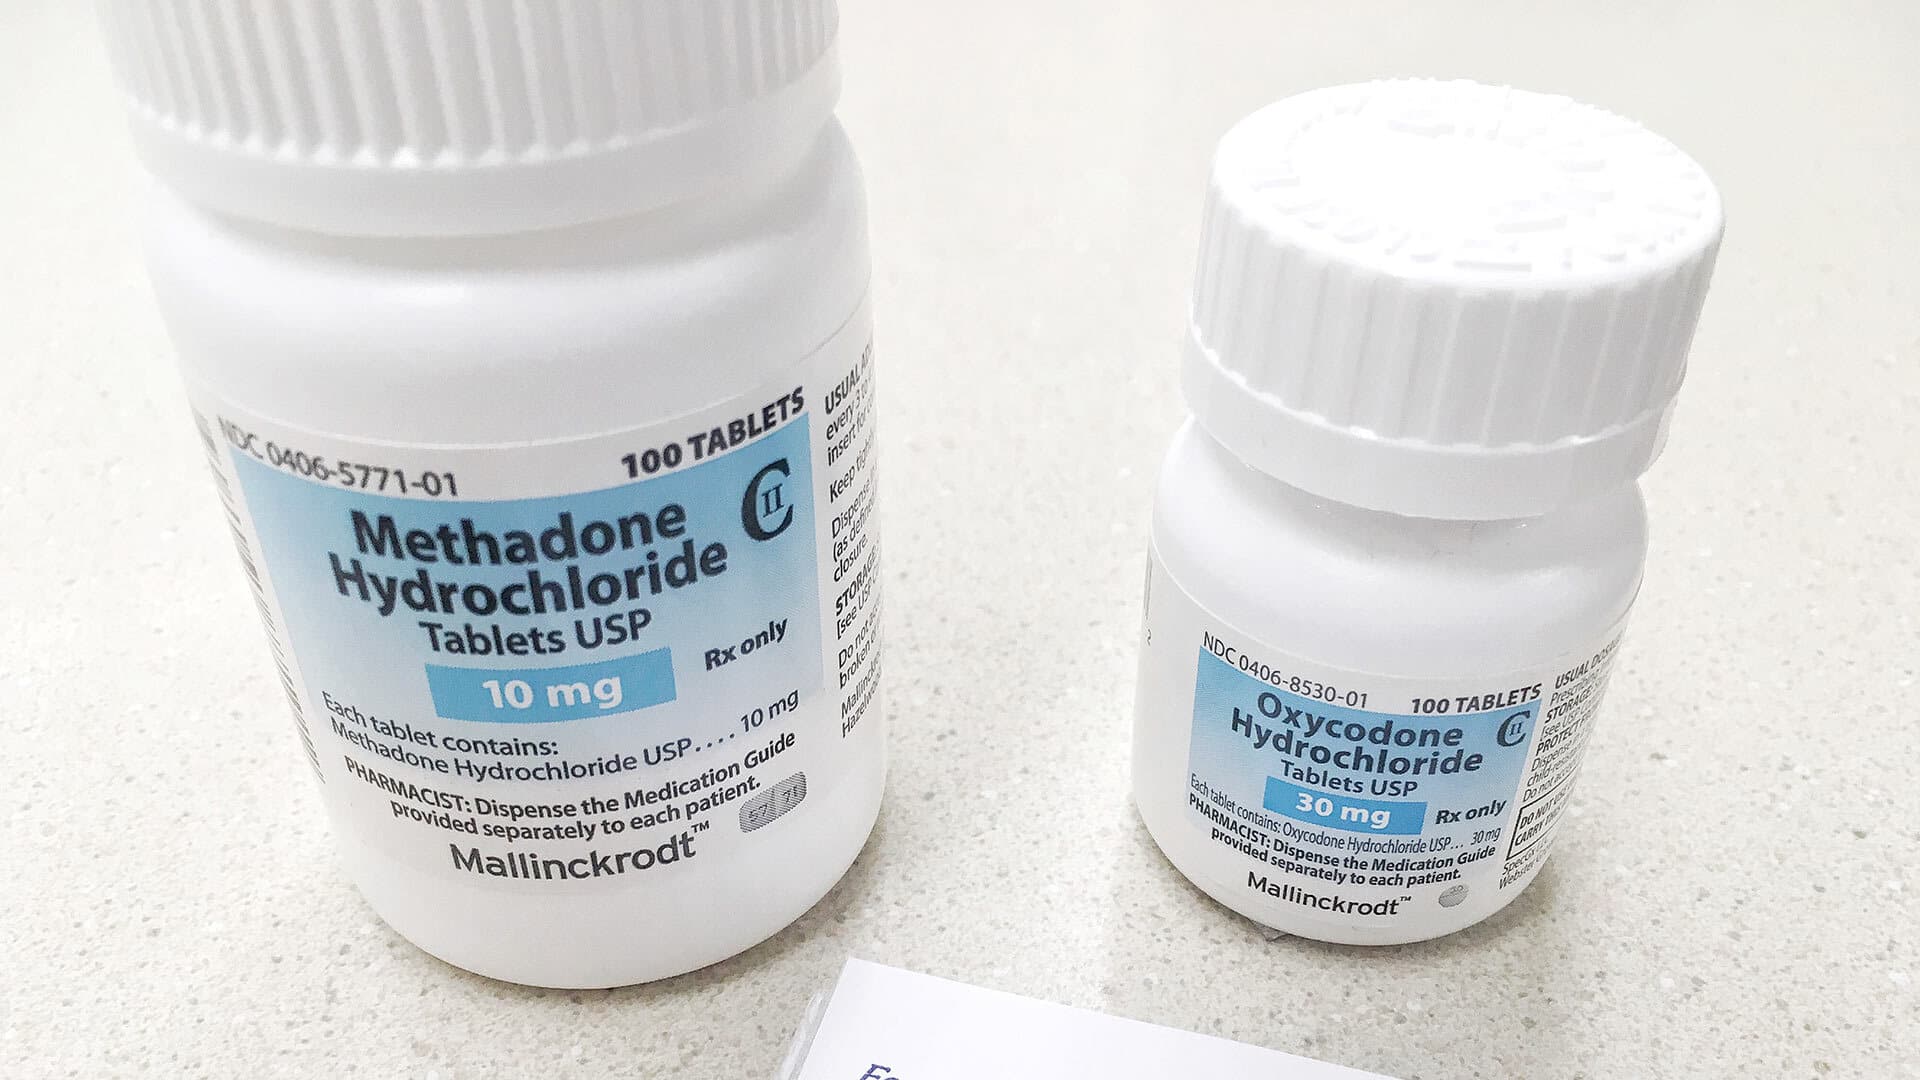 Bottles of methadone hydrochloride and oxycodone hydrochlroide